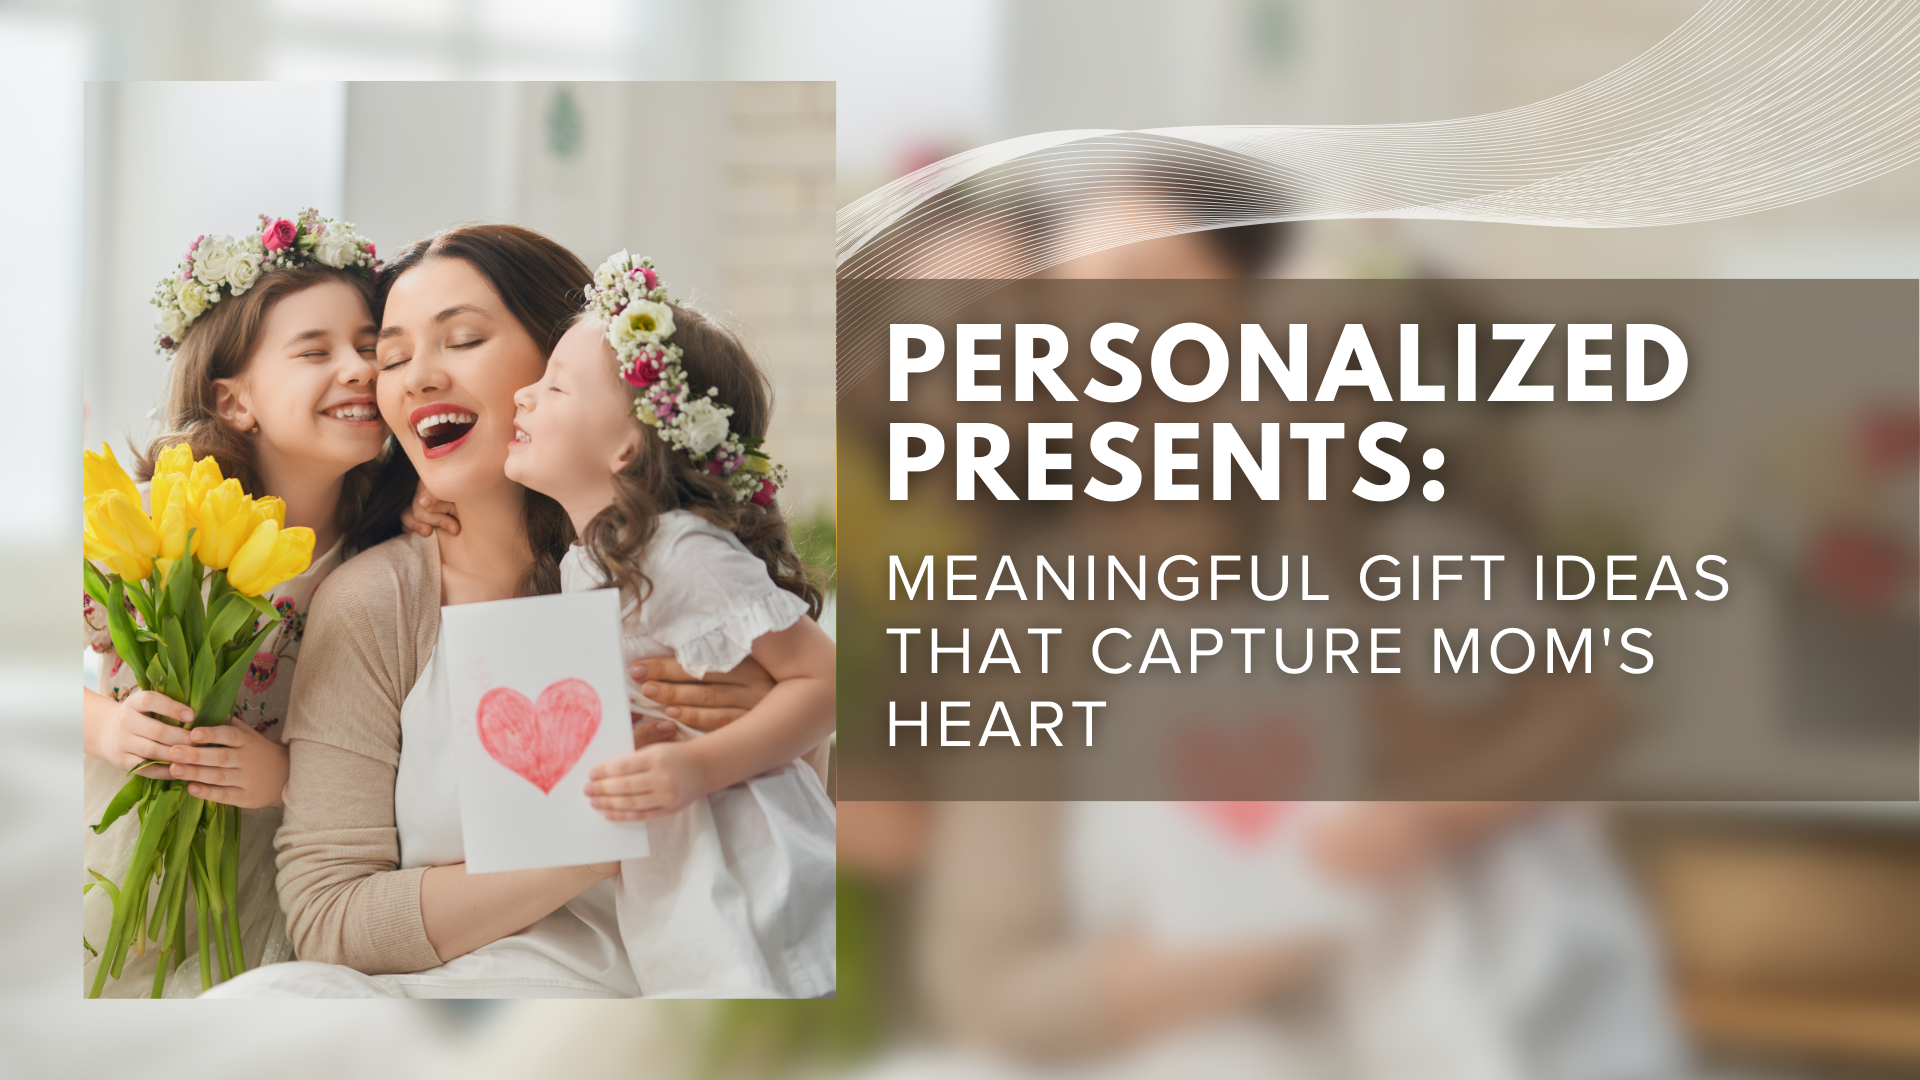 Personalized Presents: Meaningful Gift Ideas That Capture Mom's Heart